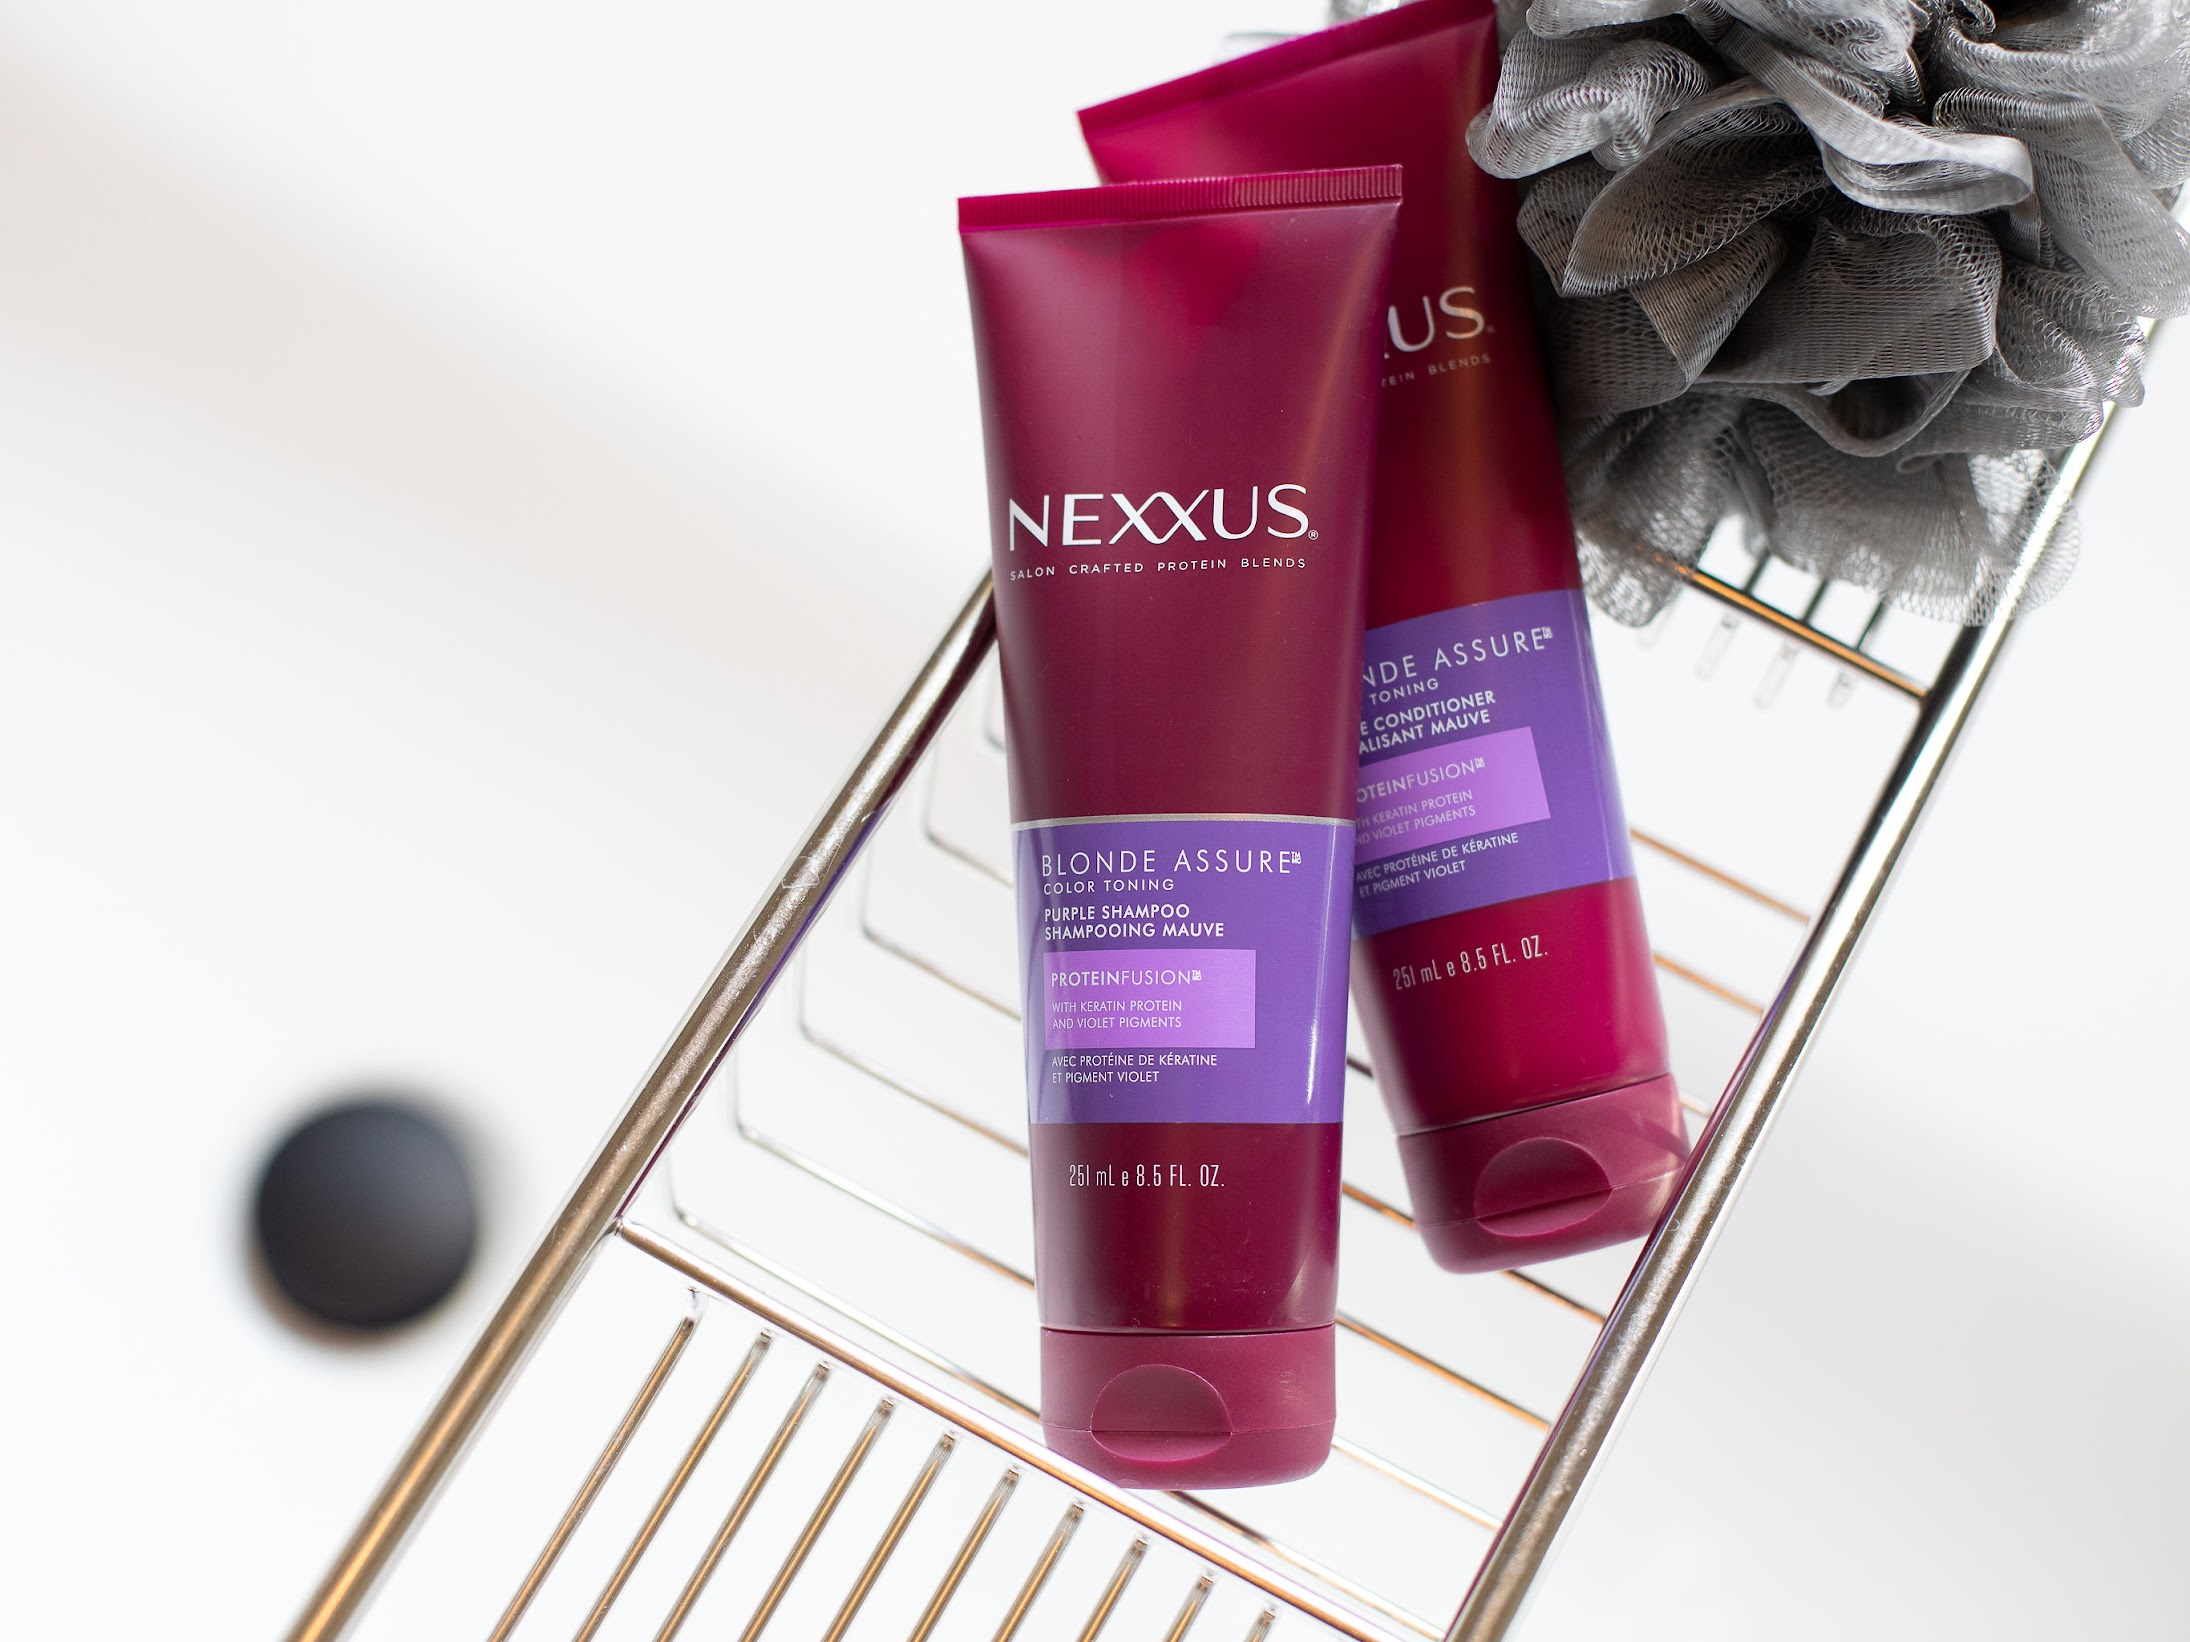 Pick Up The Unilever Hair Care Items You Love Or Try Something New And Save BIG When You Shop At Publix on I Heart Publix 2